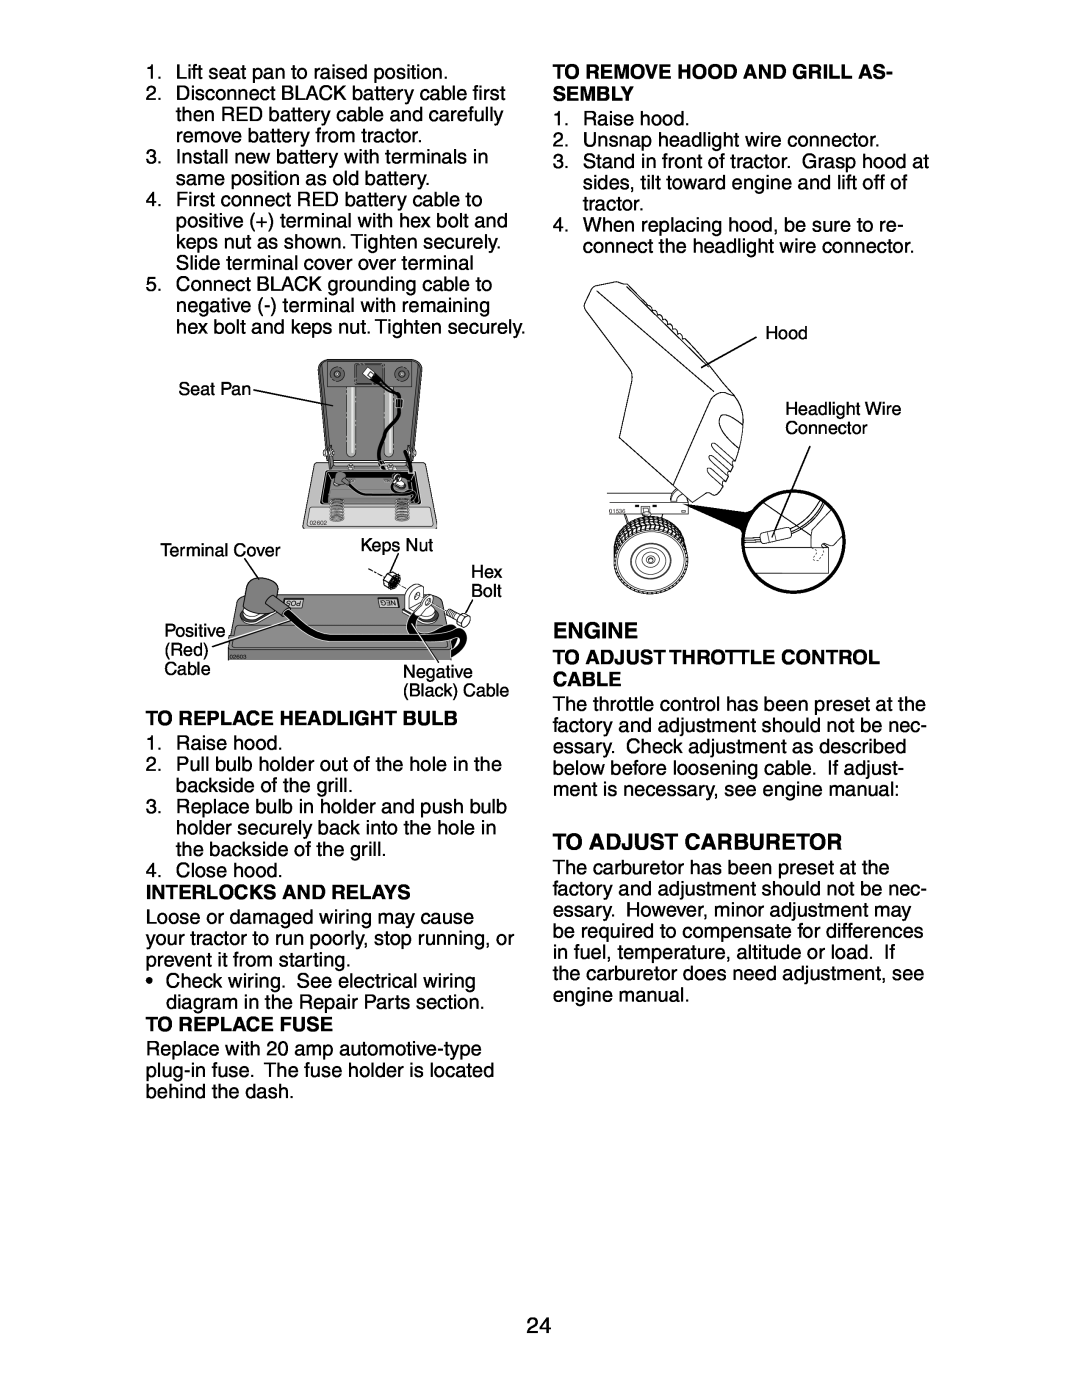 Poulan 271190 manual To Remove Hood And Grill As- Sembly, To Replace Headlight Bulb, Interlocks And Relays, To Replace Fuse 